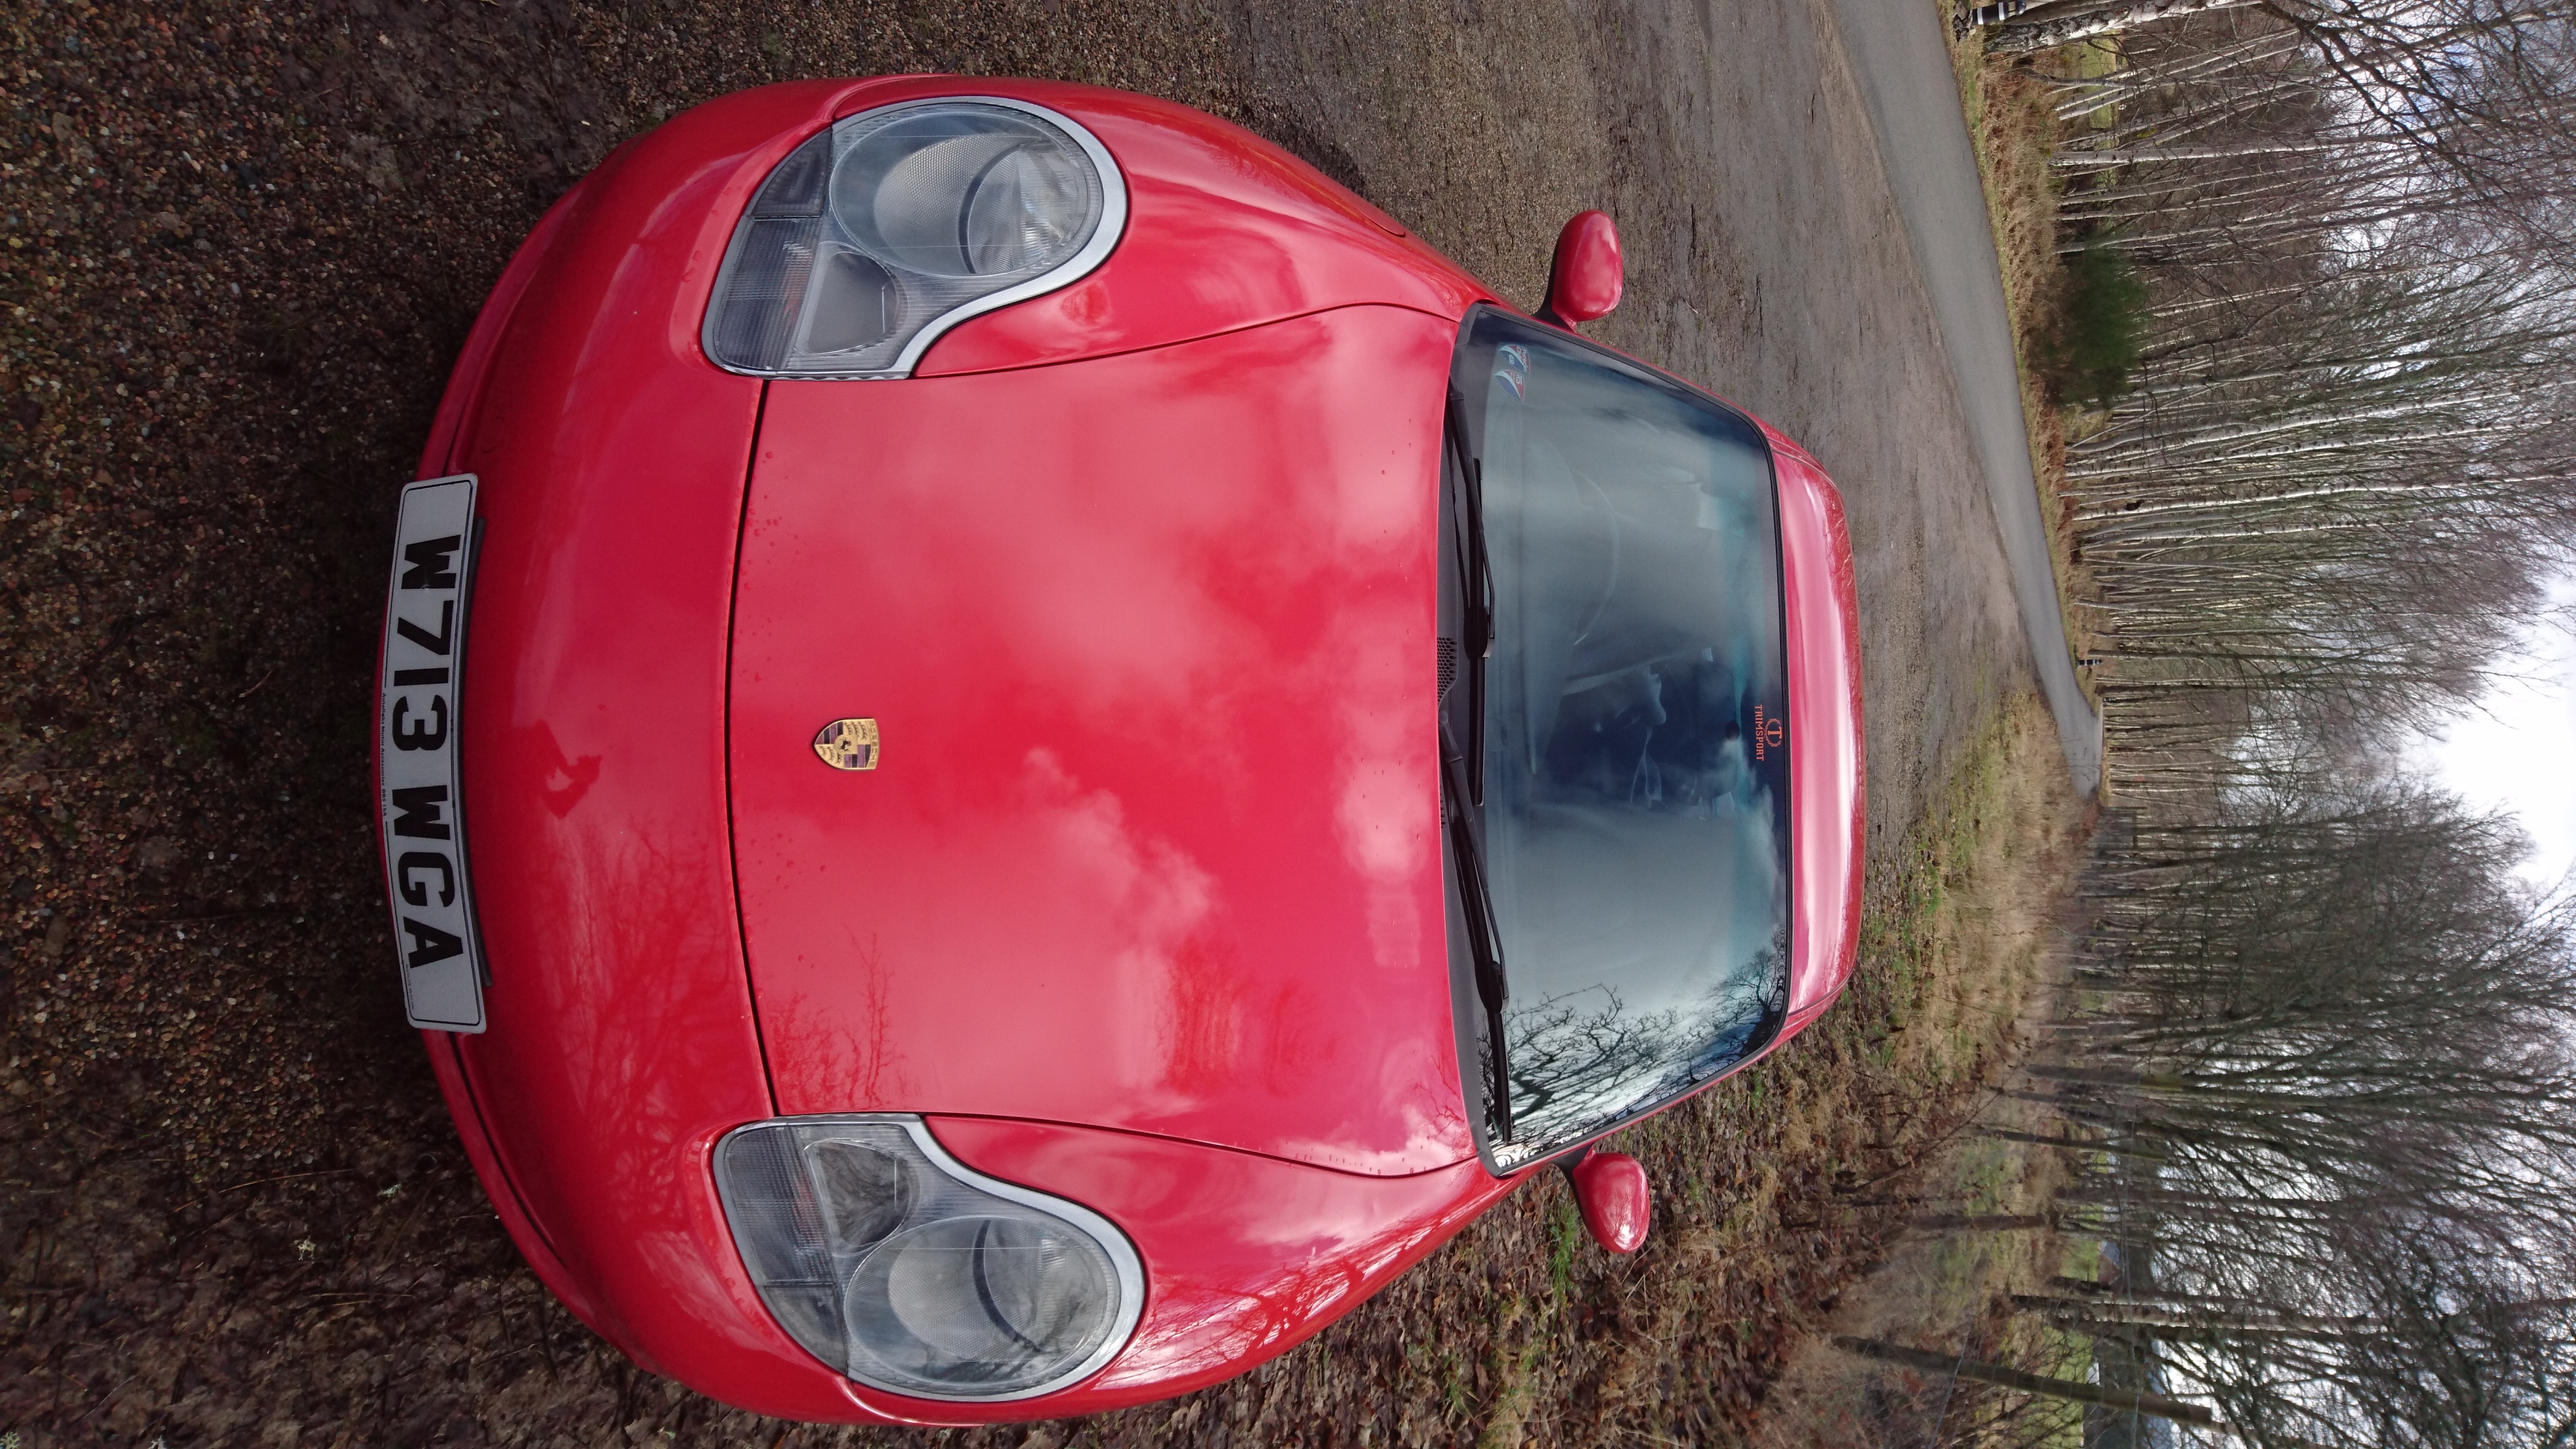 Knackered old Porsche with loads of miles - 996 content.  - Page 19 - Readers' Cars - PistonHeads